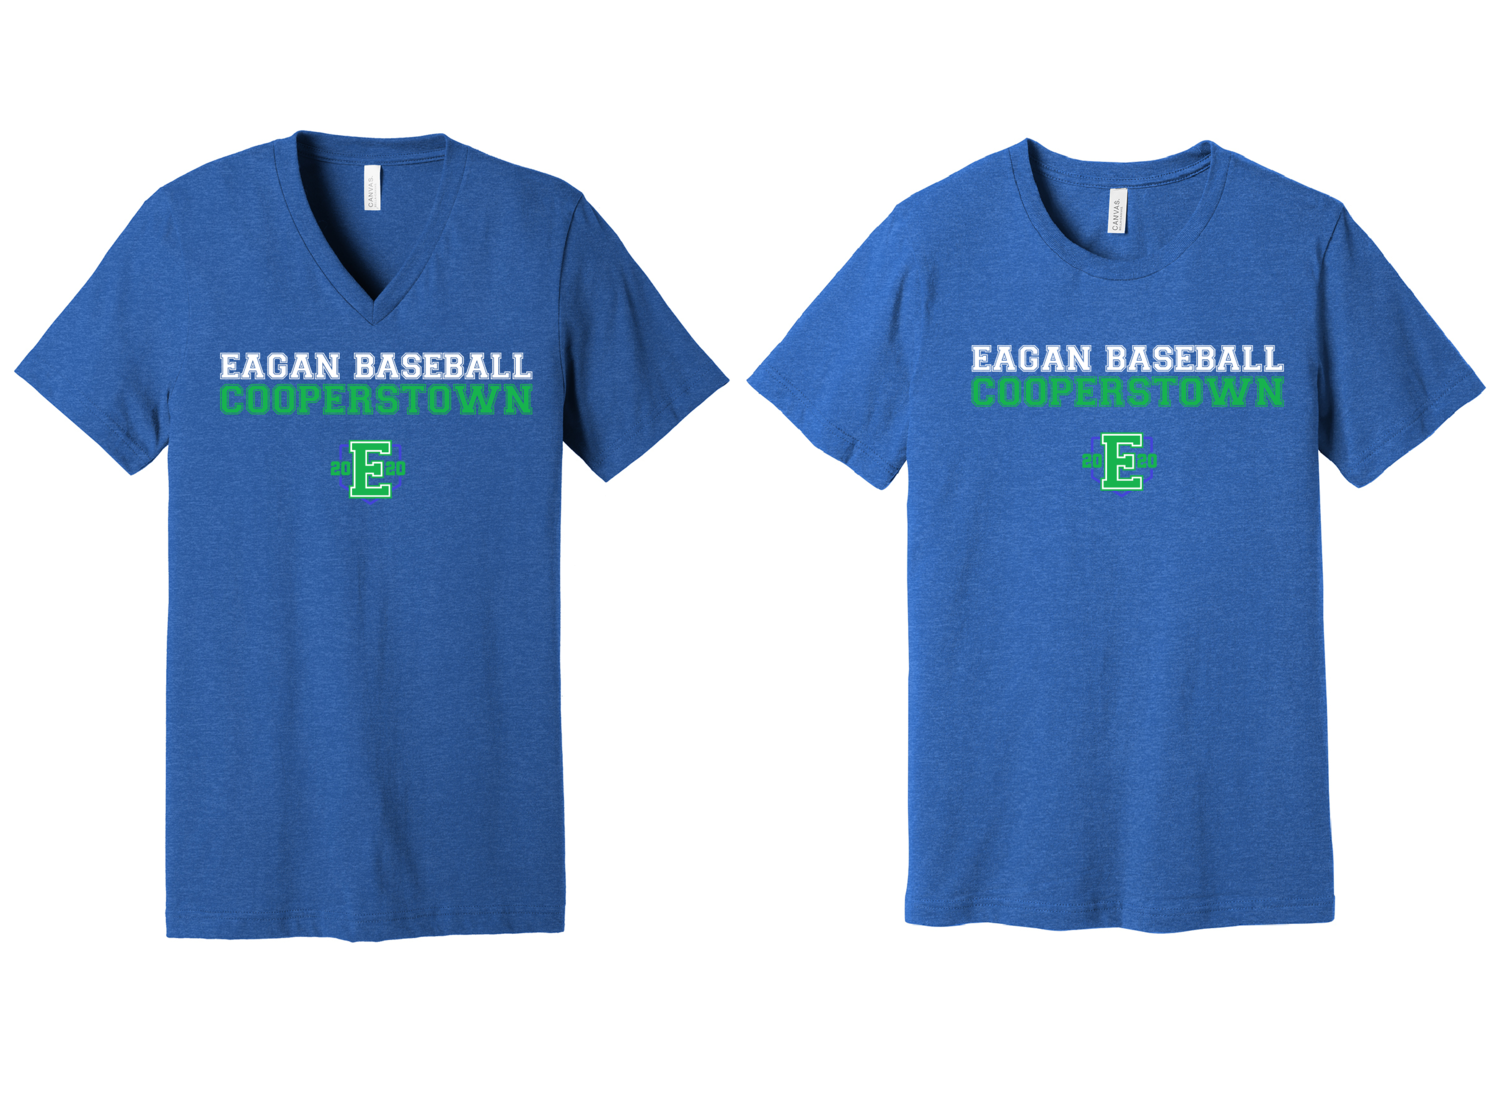 2020 Eagan Cooperstown Team Shirt - Adult and Youth